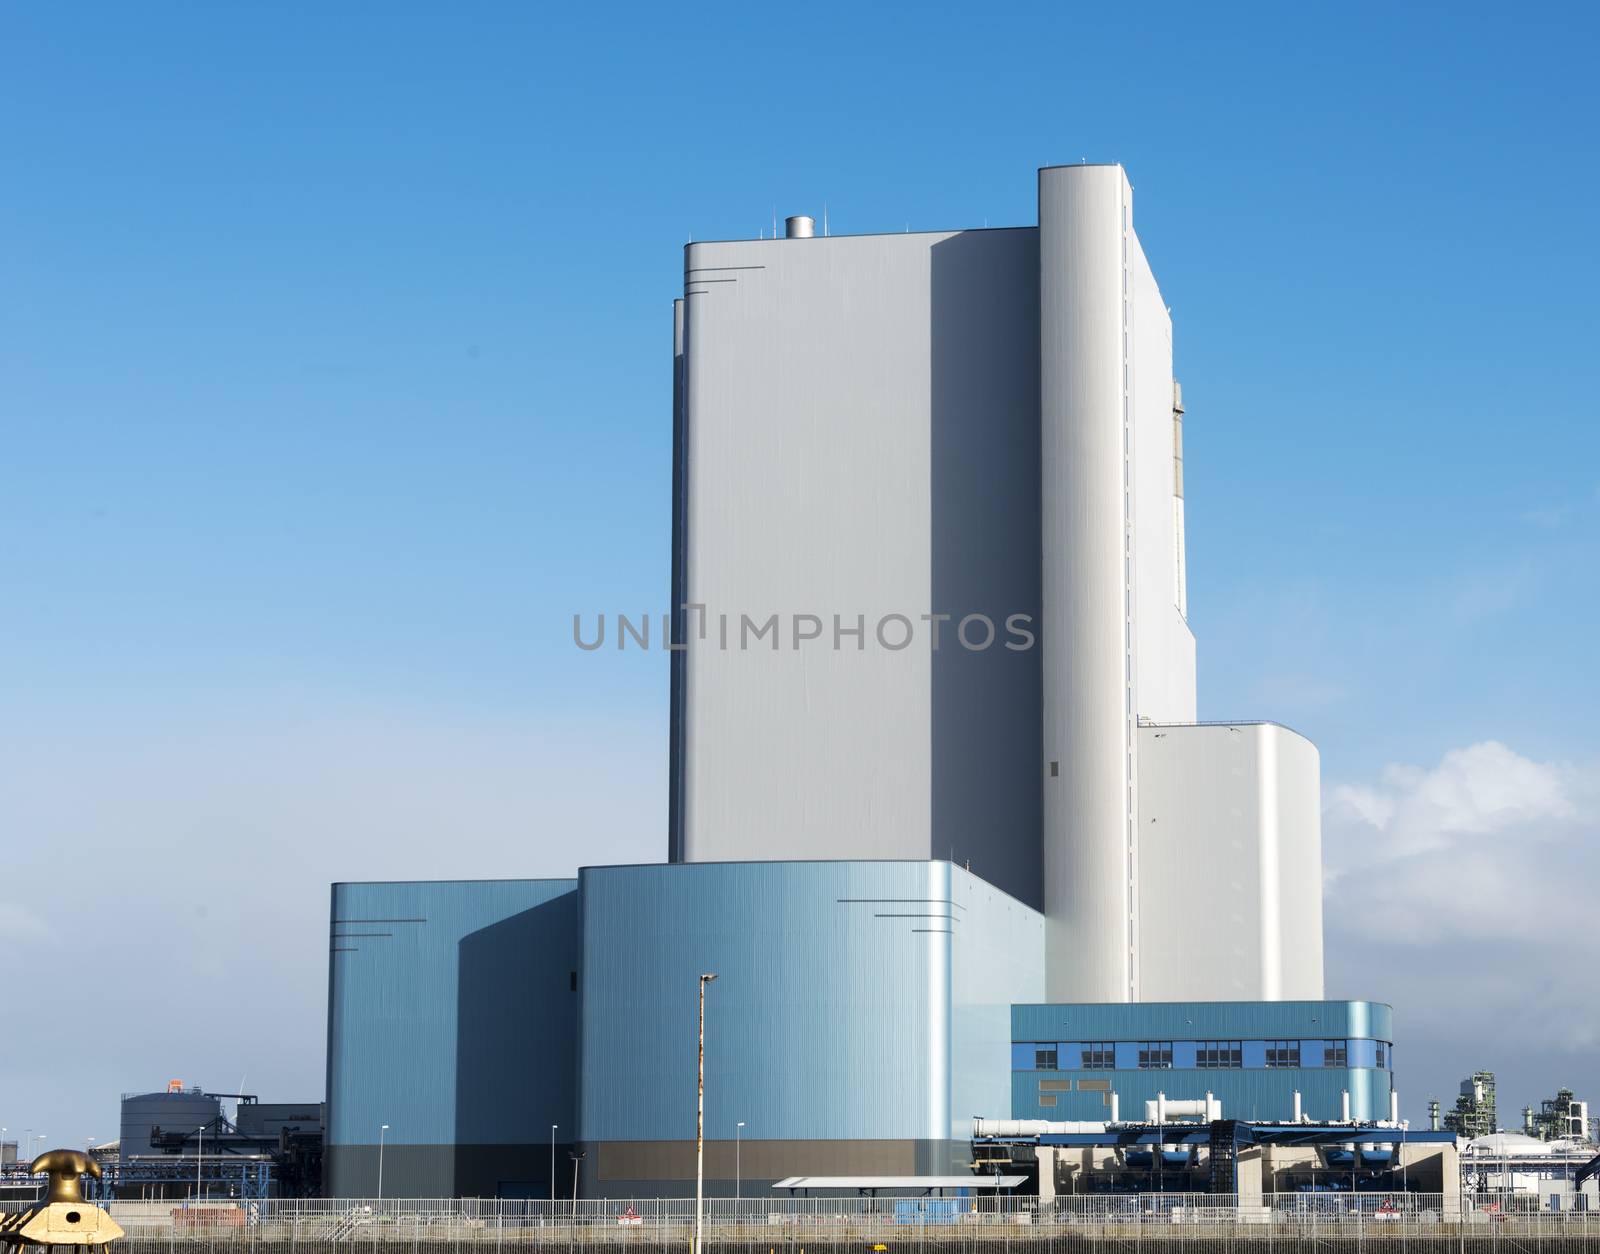 coal-fired power plant on the Maasvlakte, the industrial harbor district of Rotterdam